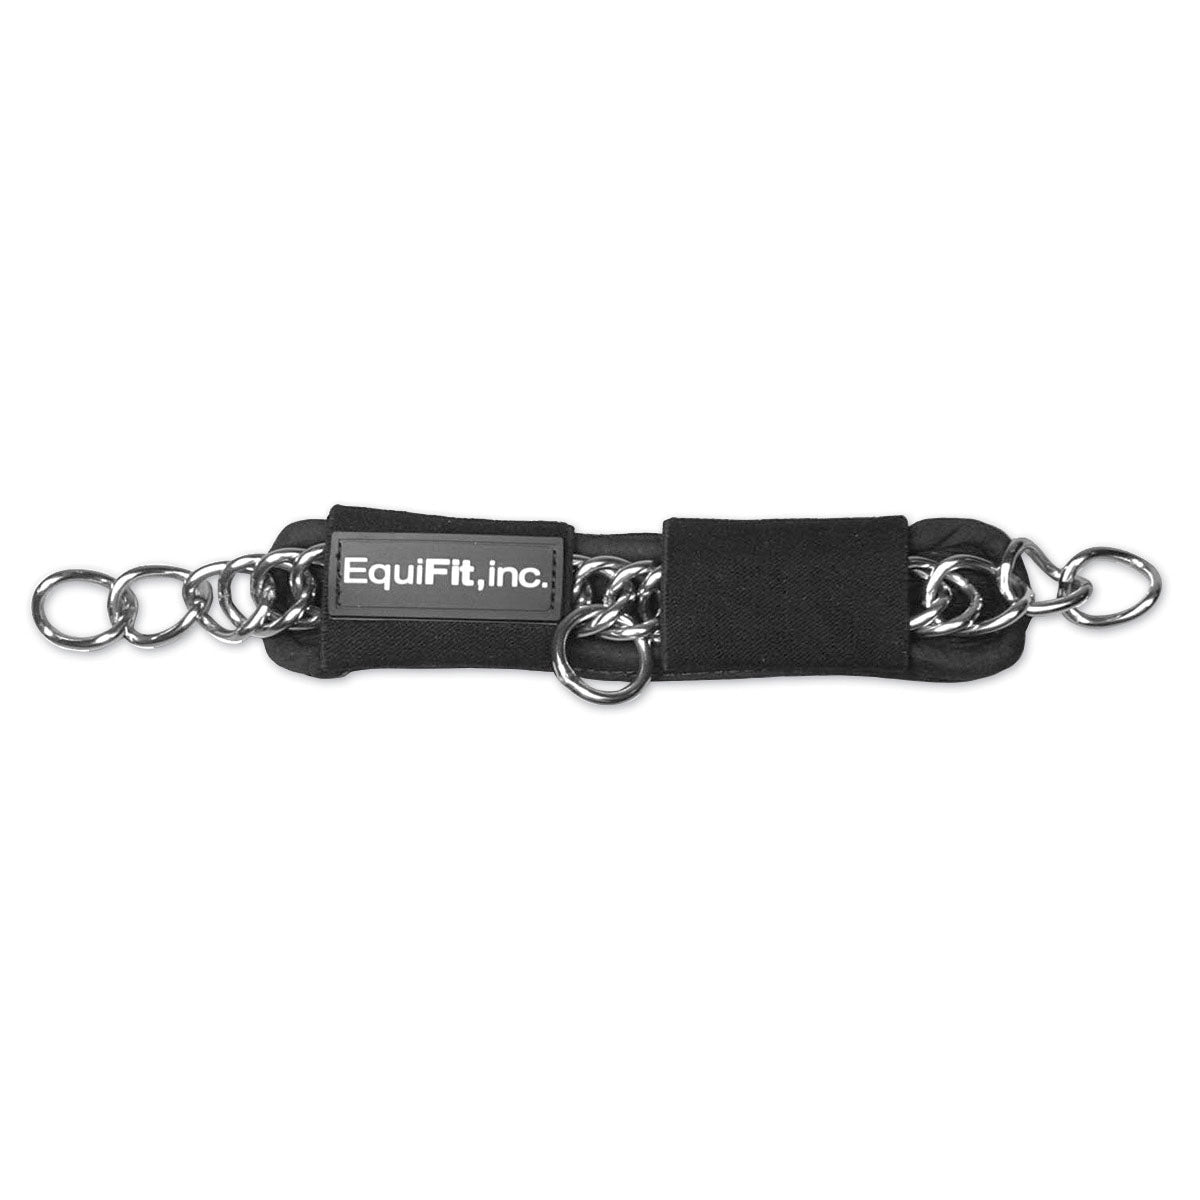 product shot image of the equifit equitfit curb chain guard